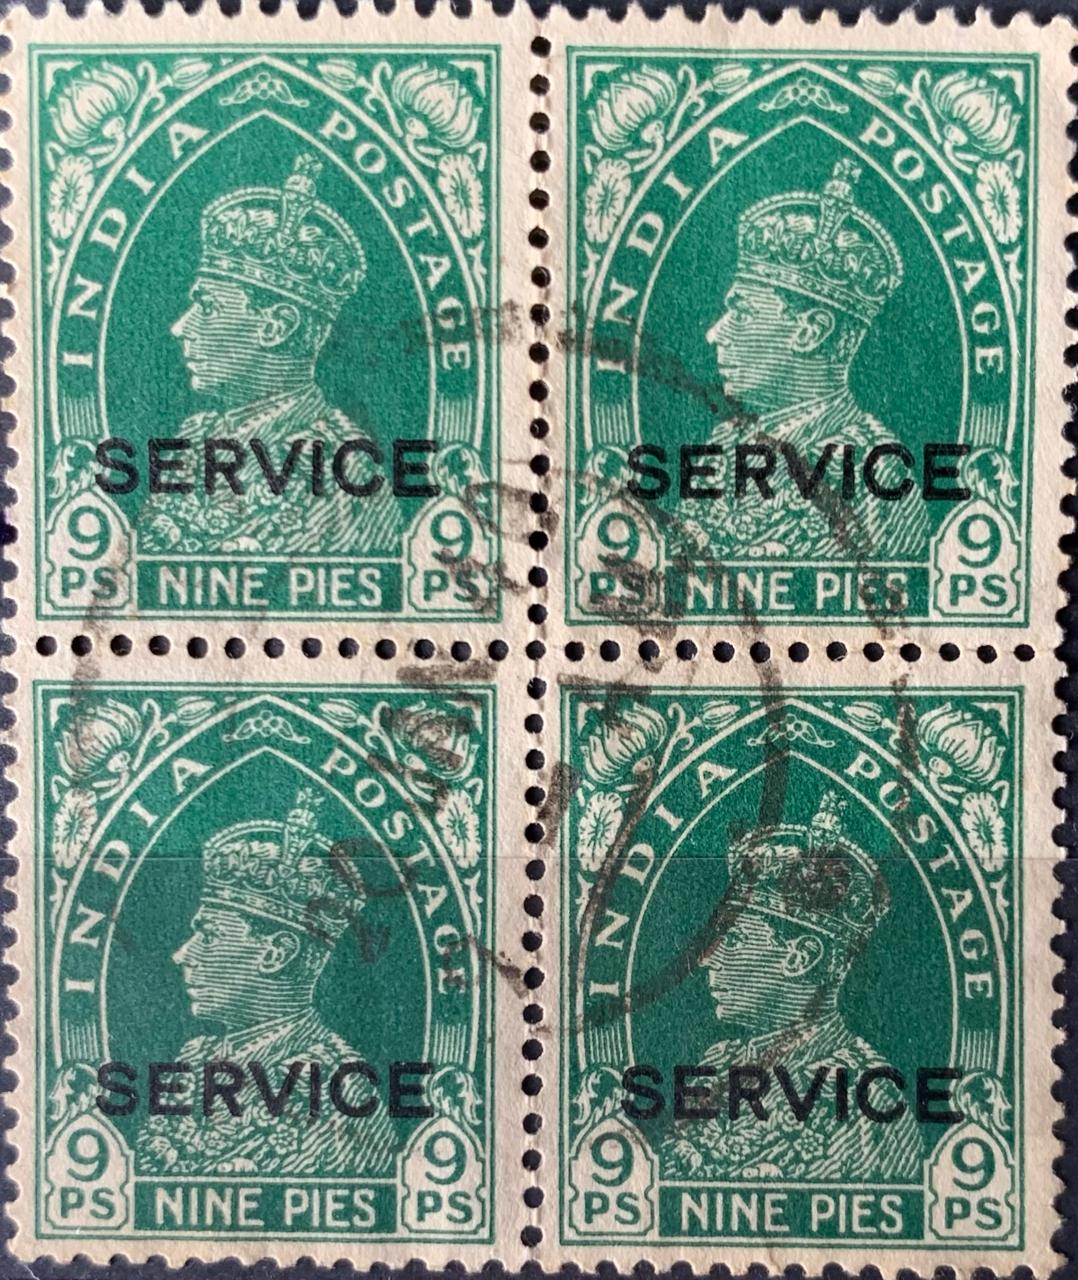 India 1937 KGVI 9pies with service overprint block of four fine used